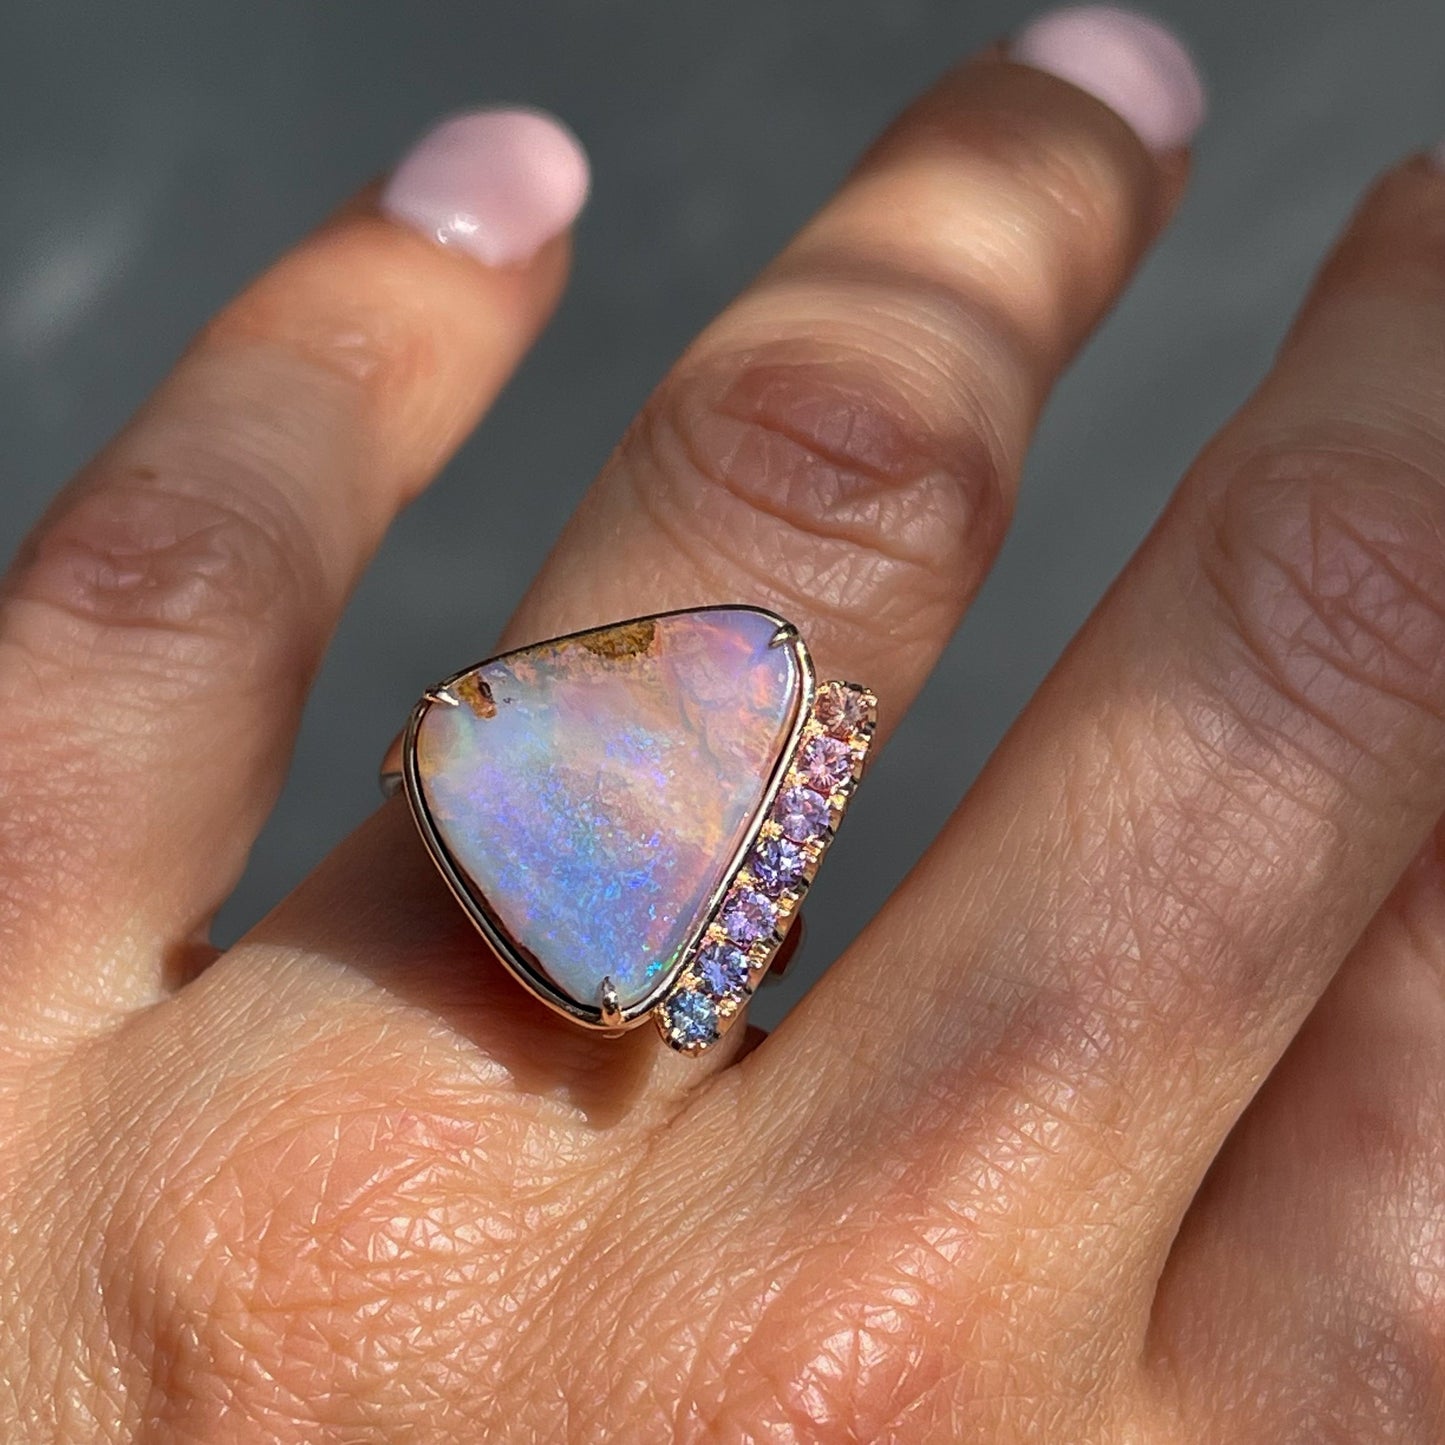 An Australian Opal Ring by NIXIN Jewelry modeled on a hand. The rose gold opal ring is a one of a kind piece of jewelry — a form of opal art.